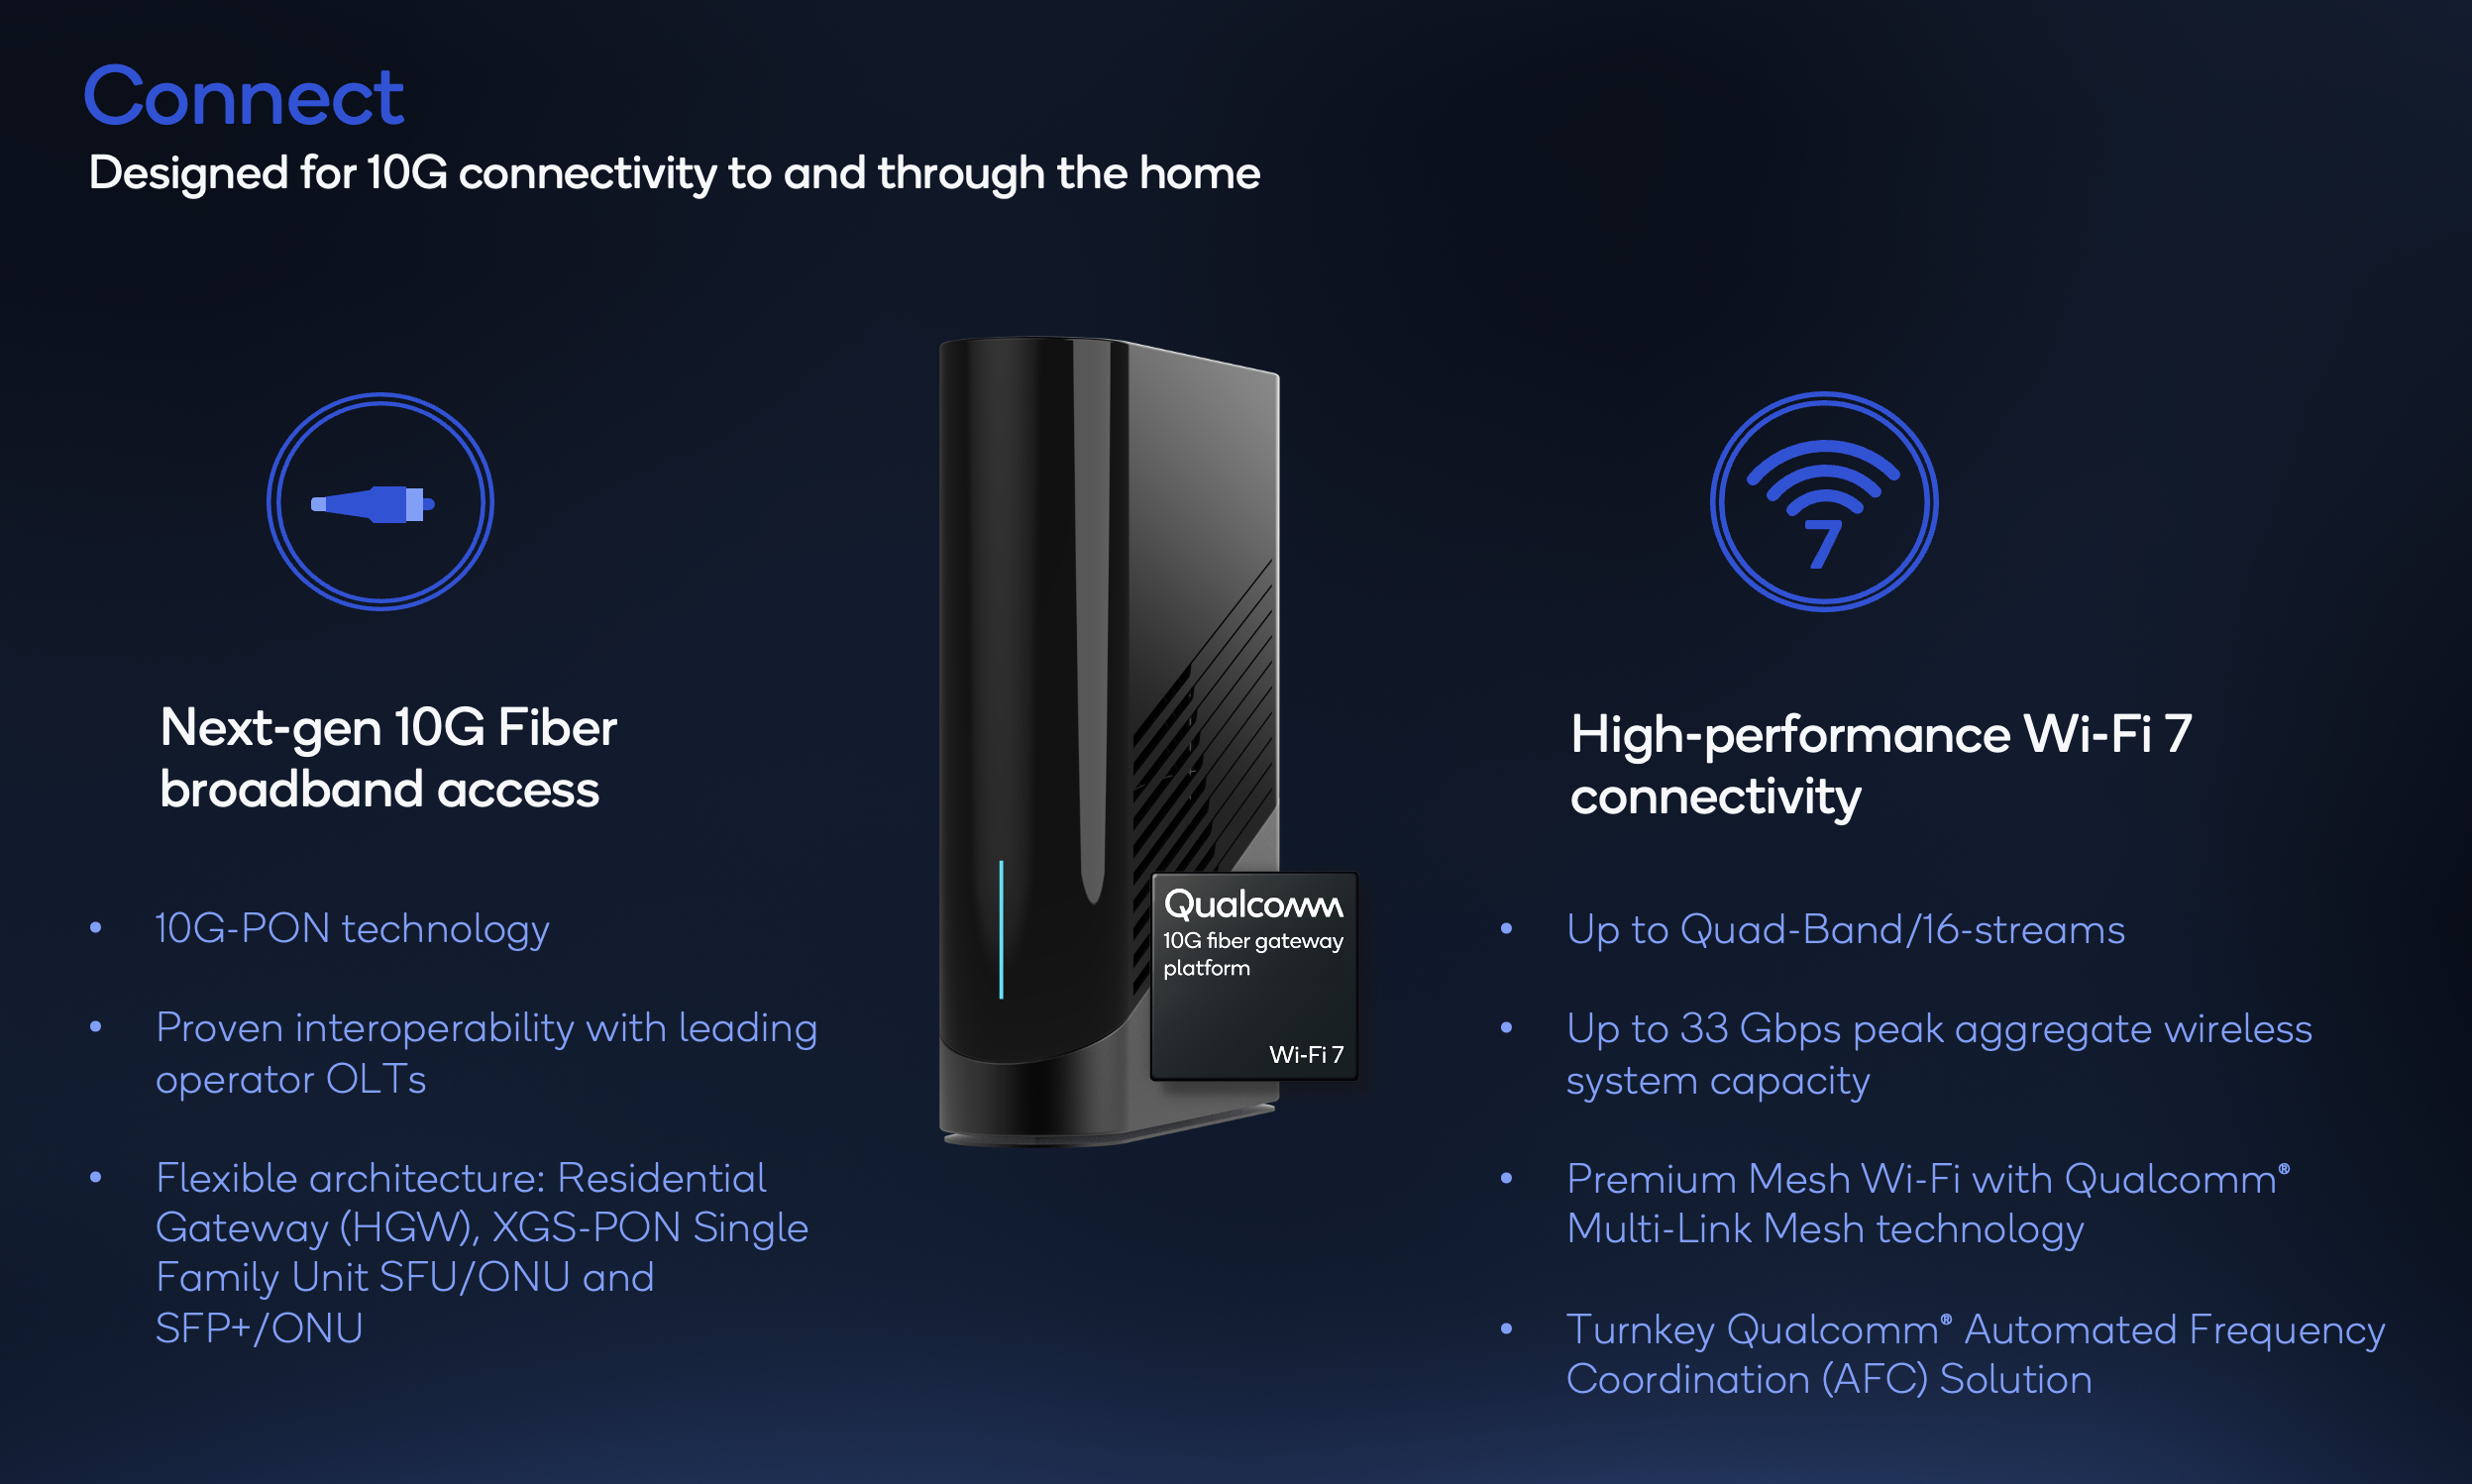 Redefining the future of broadband experience with the Qualcomm